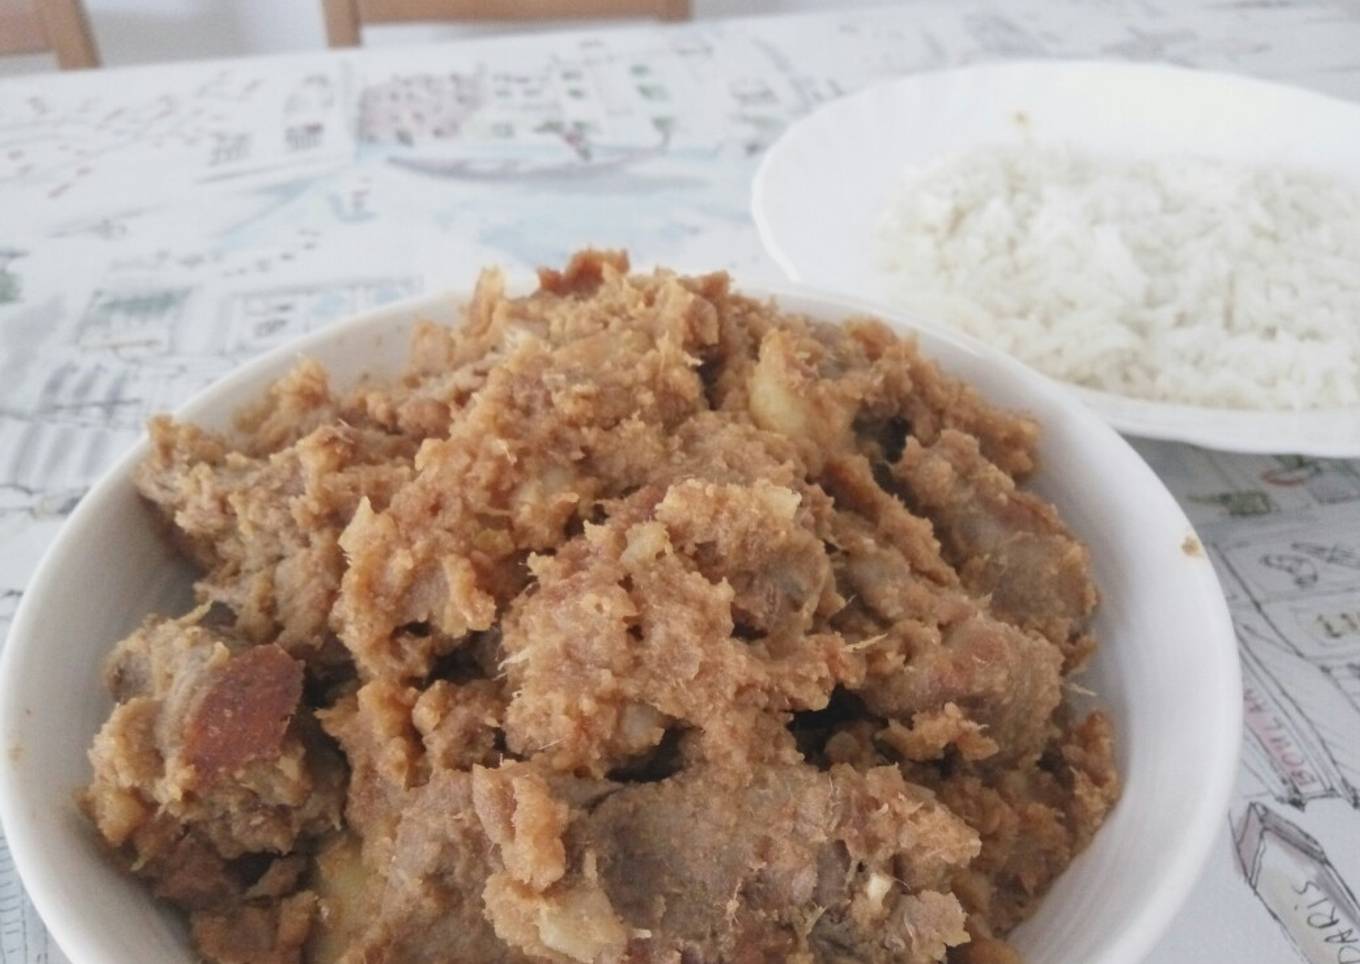 Rendang beef and Hainam rice